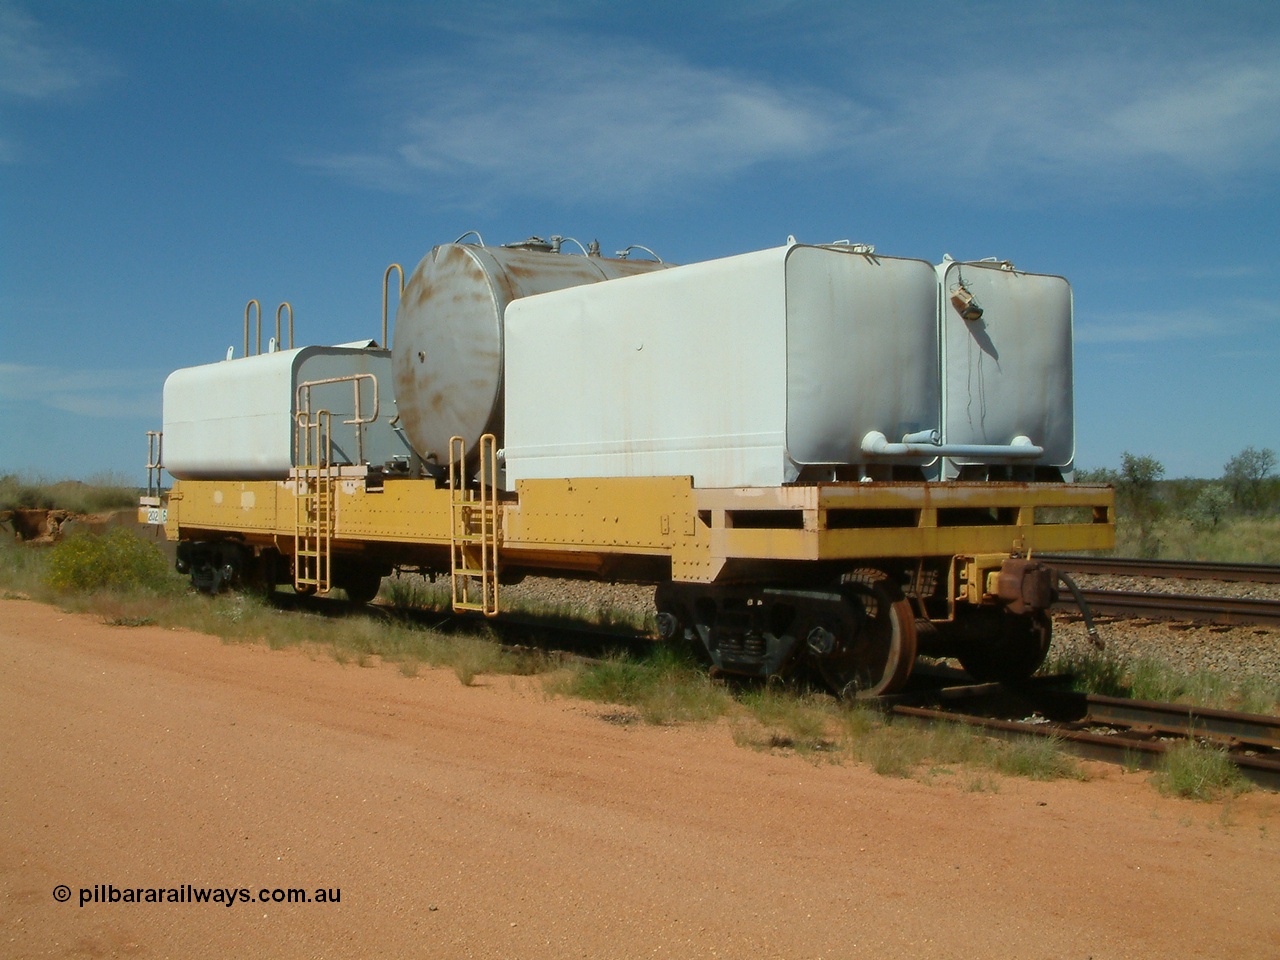 040419 102228
Abydos back track, riveted flat waggon 202 with three water tanks fitted, 3/4 view from non-handbrake end, shows access ladder profiles, originally part of the 'camp train', modified by Mt Newman Mining railway workshops.
Keywords: BHP-flat-waggon;